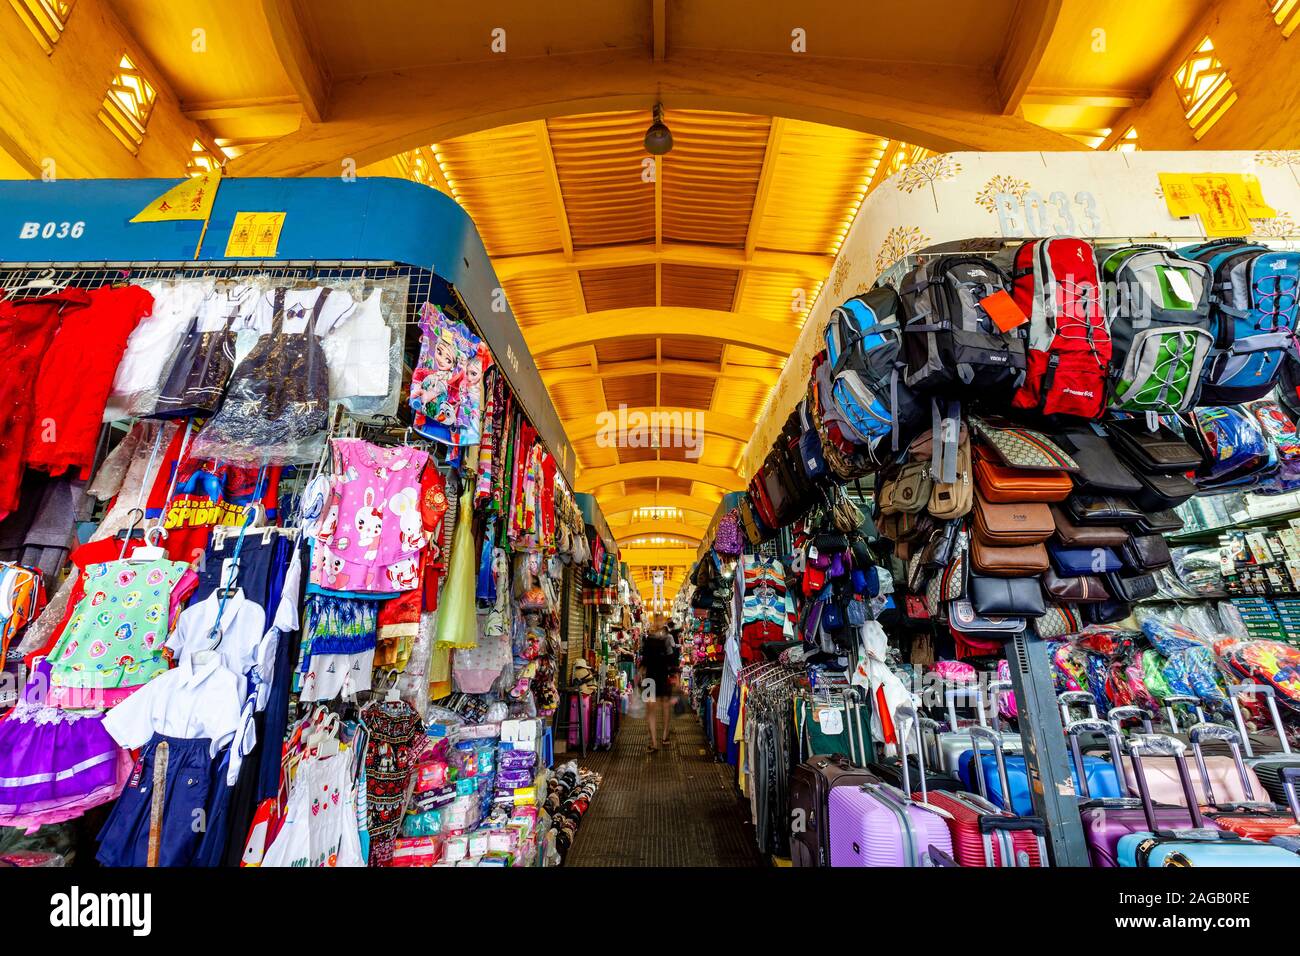 Clothes and Luggage For Sale In The Central Market, Phnom Penh, Cambodia. Stock Photo